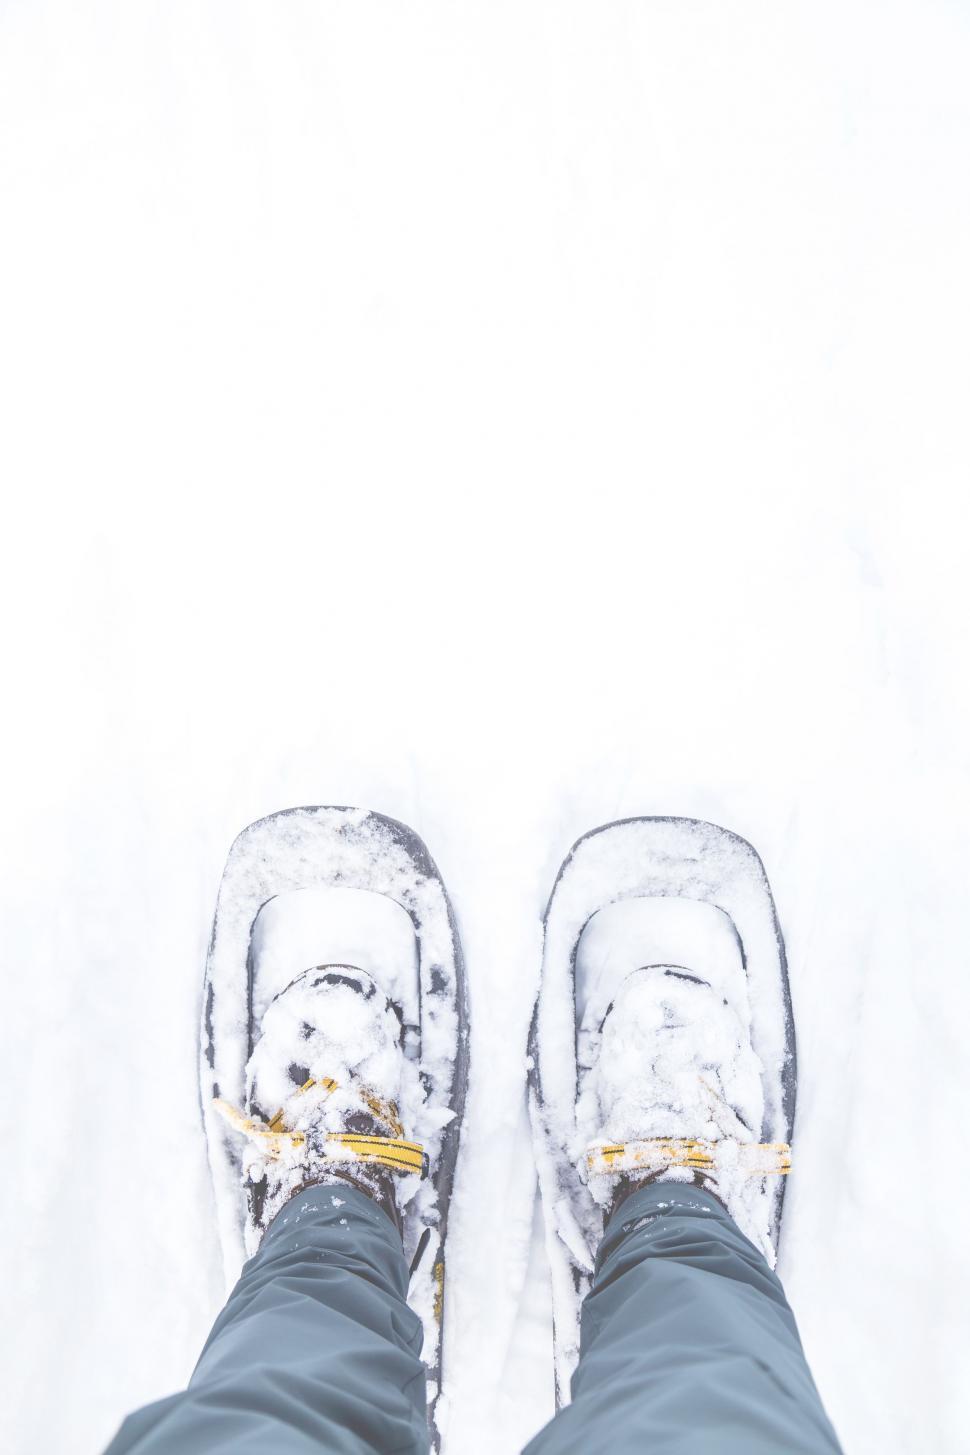 Free Image of Person Standing in Snow With Snow Shoes 